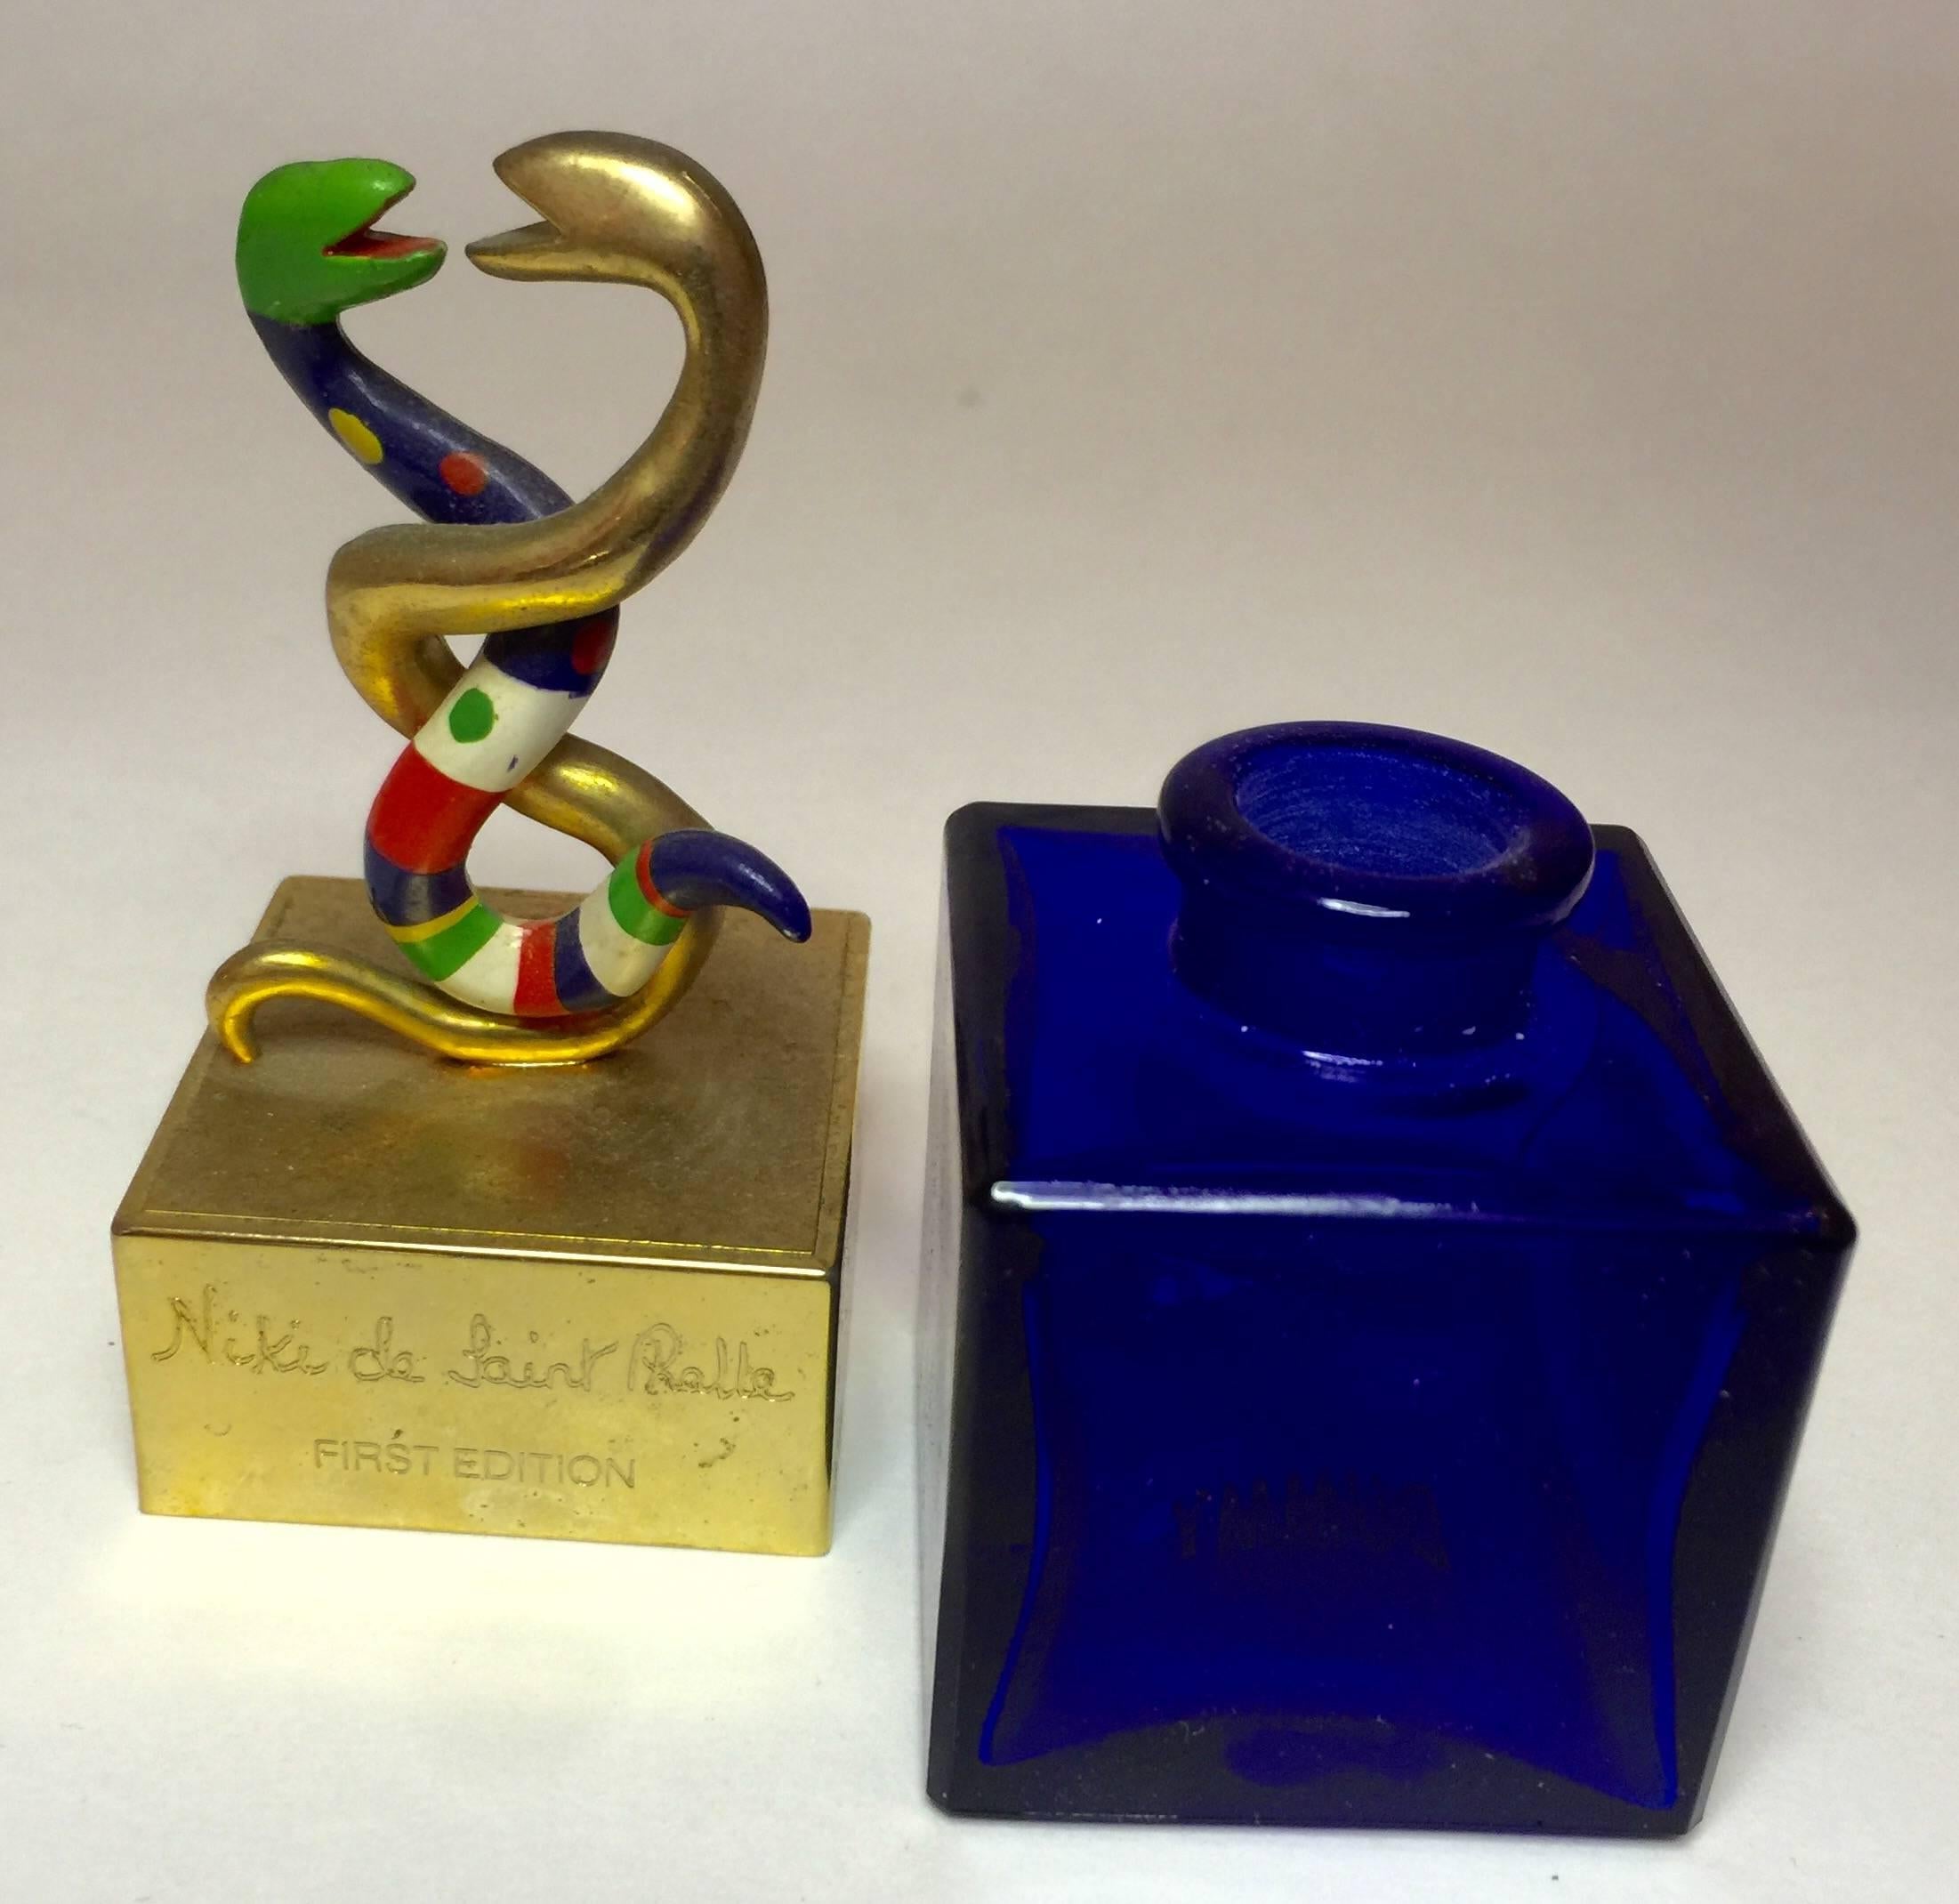 This wonderful iconic 1980's perfume bottle with enameled resin intertwined snakes top and cobalt blue glass square perfume receptacle bottom  is by designer Niki de Saint Phalle. The bottle is empty, and has no perfume contents, box or pamphlet. It